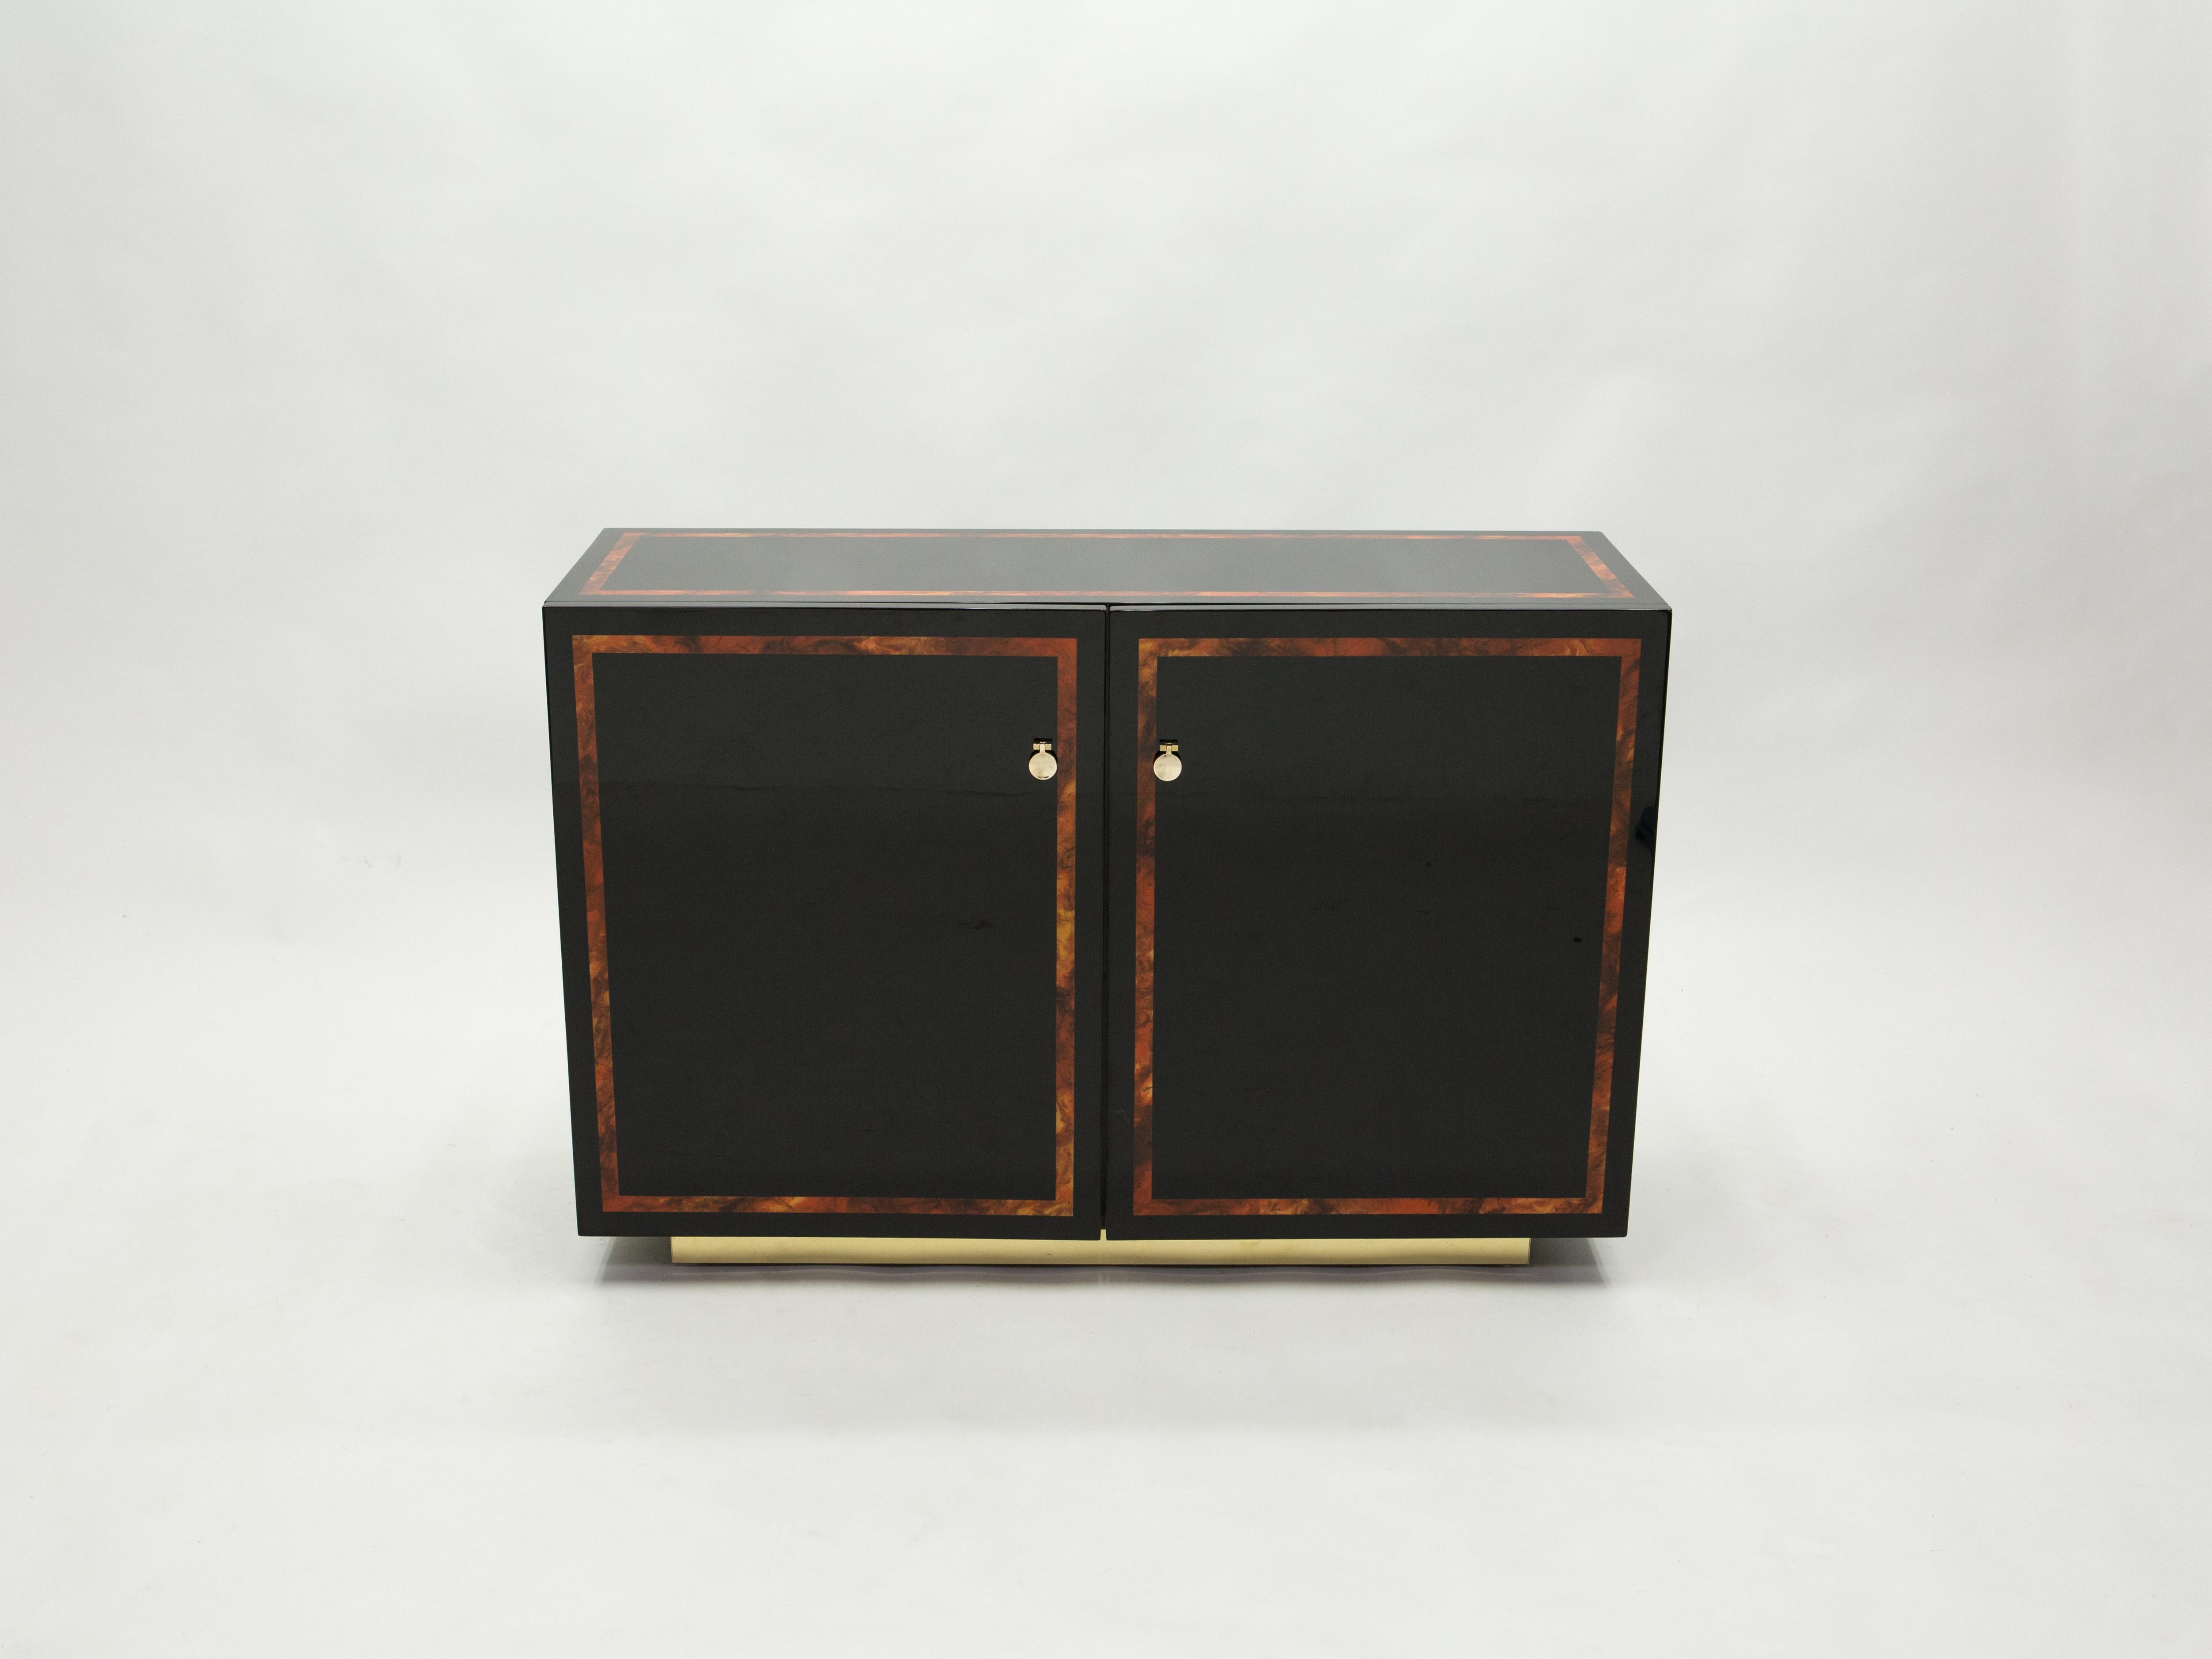 Glossy black lacquer, paired with beautiful burl wood inlay and bright brass accents, feels crisp and luxe on this beautiful sideboard cabinet. Its boxy, simple style is typical of both the 1970s and designer Jean Claude Mahey for Maison Romeo